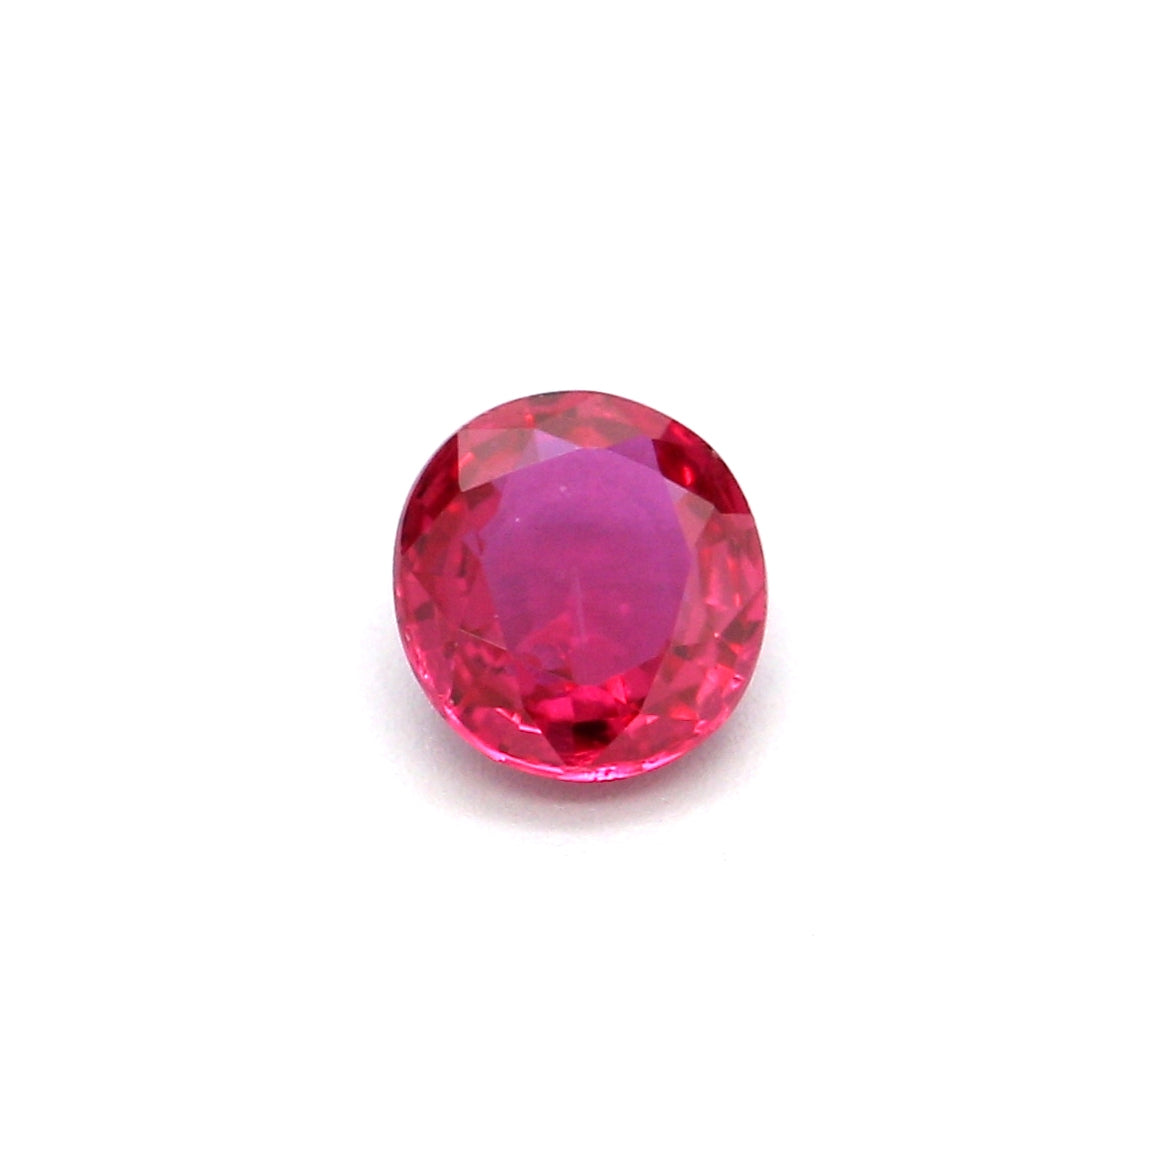 0.35ct Pinkish Red, Oval Ruby, Heated, Thailand - 4.49 x 4.12 x 2.07mm